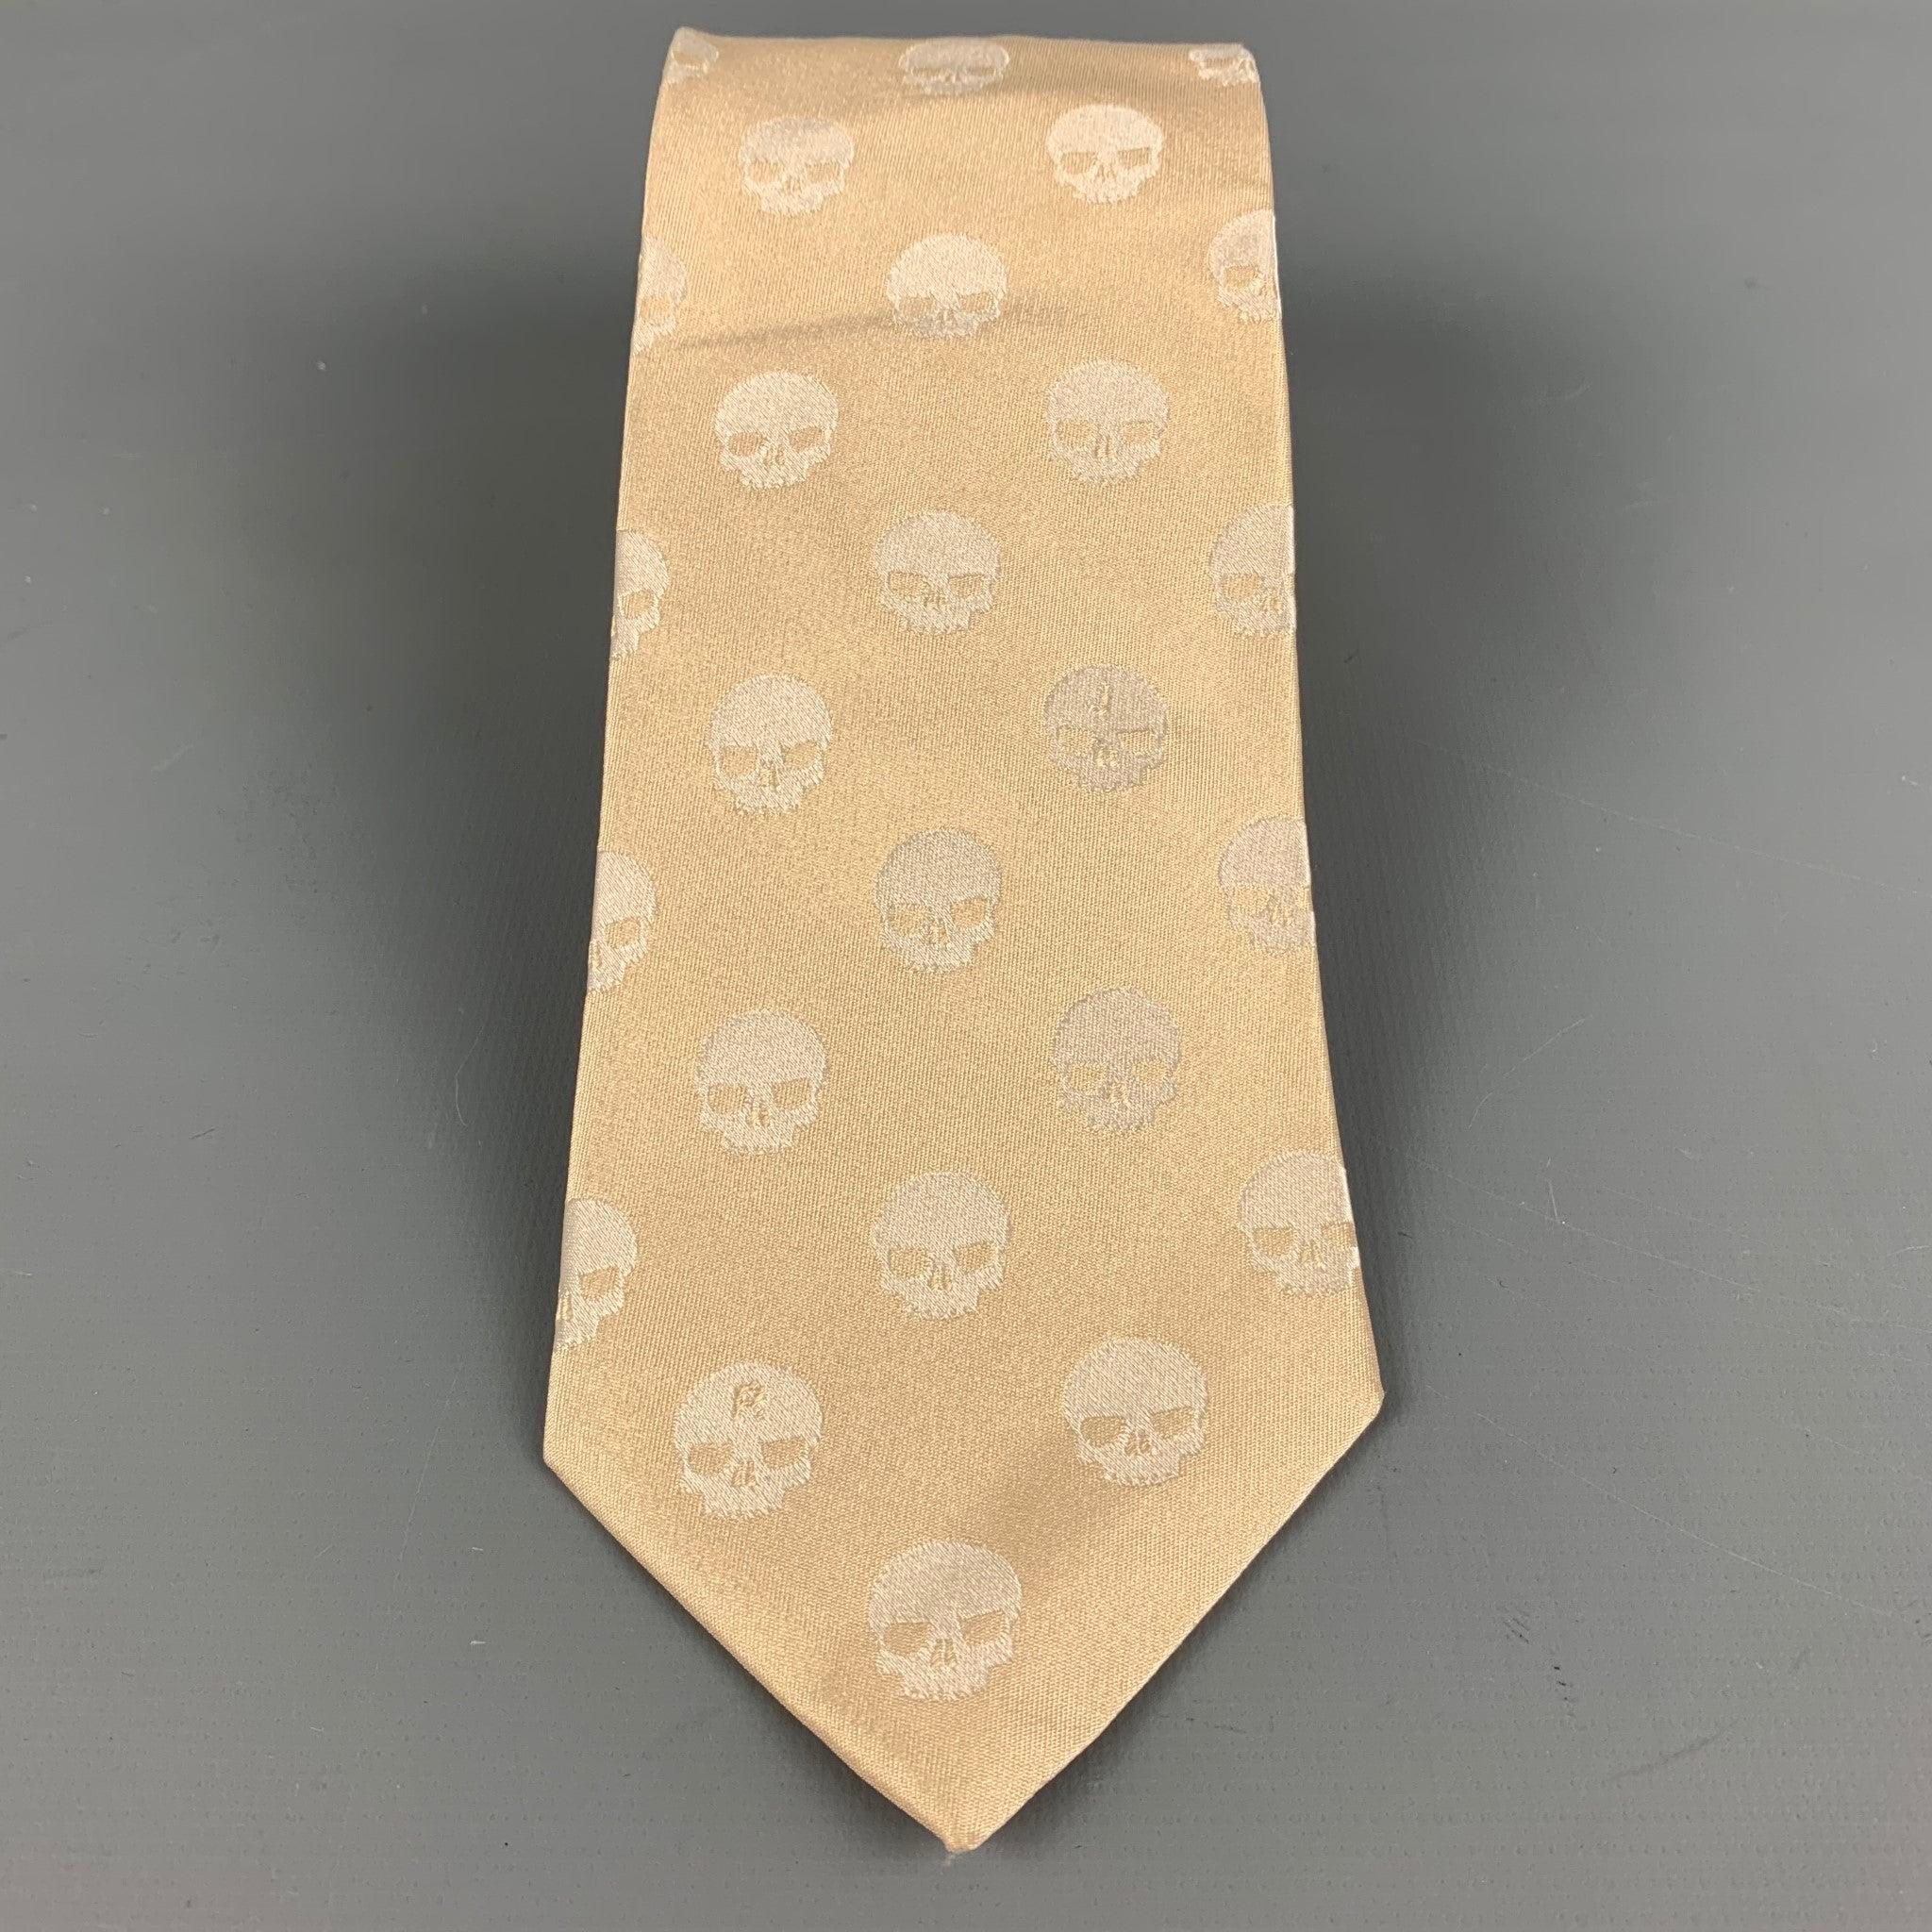 JOHN RICHMOND neck tie comes in a beige skull print silk. Made in Italy. Very Good
Pre-Owned Condition. 

Measurements: 
  Width: 3.25 inches 
  
  
 
Reference: 111350
Category: Tie
More Details
    
Brand:  JOHN RICHMOND
Color:  Beige
Pattern: 